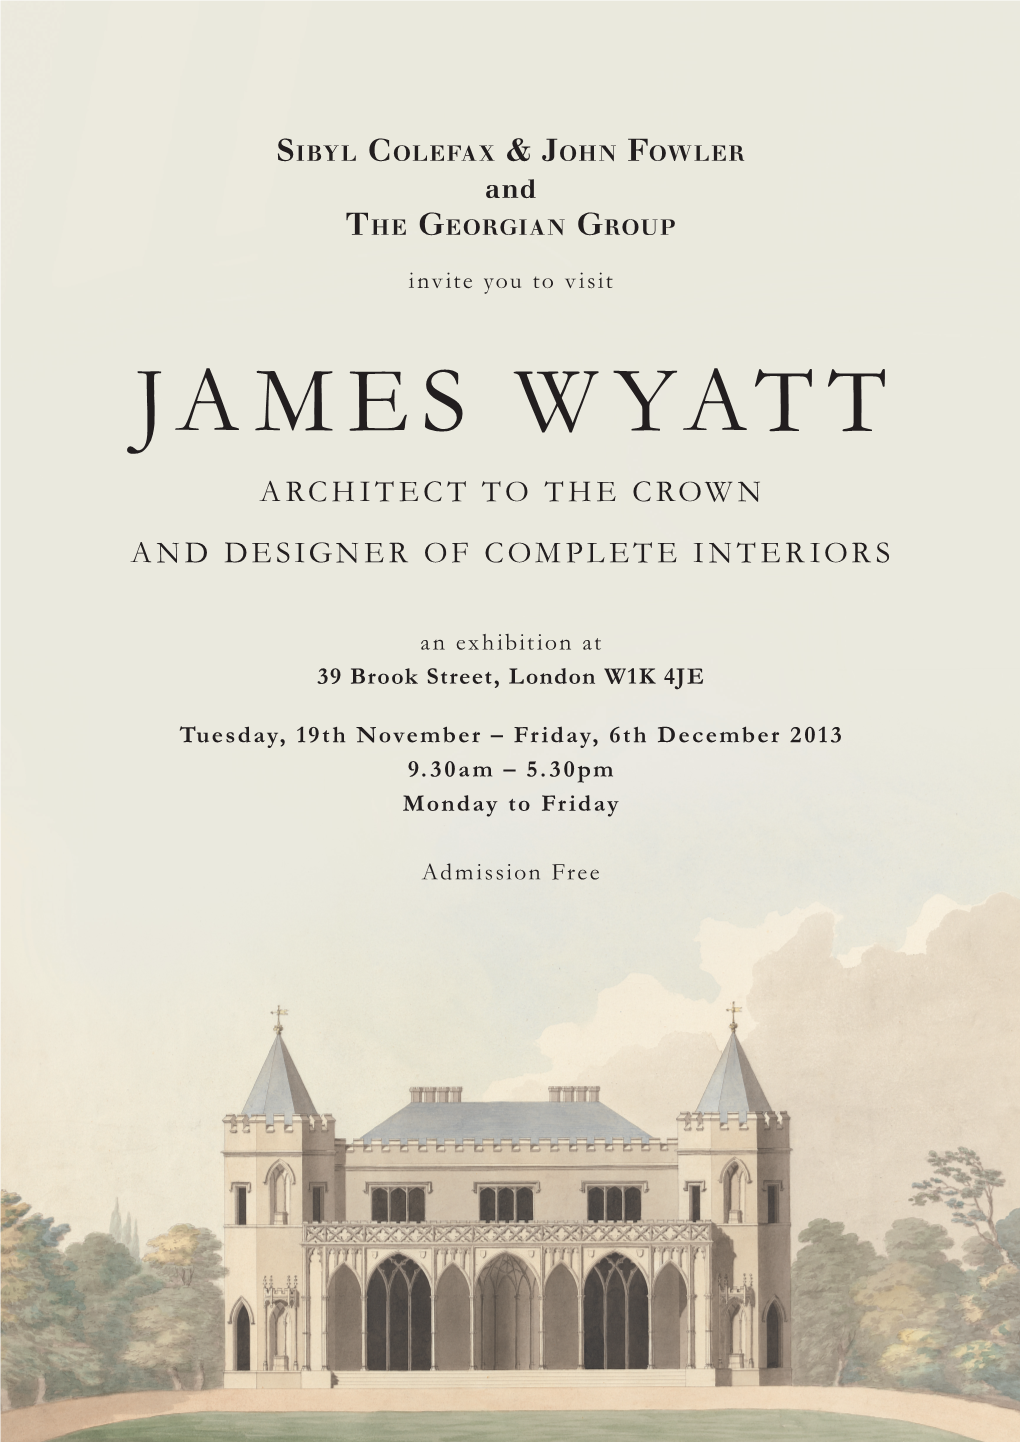 James Wyatt Architect to the Crown and Designer of Complete Interiors